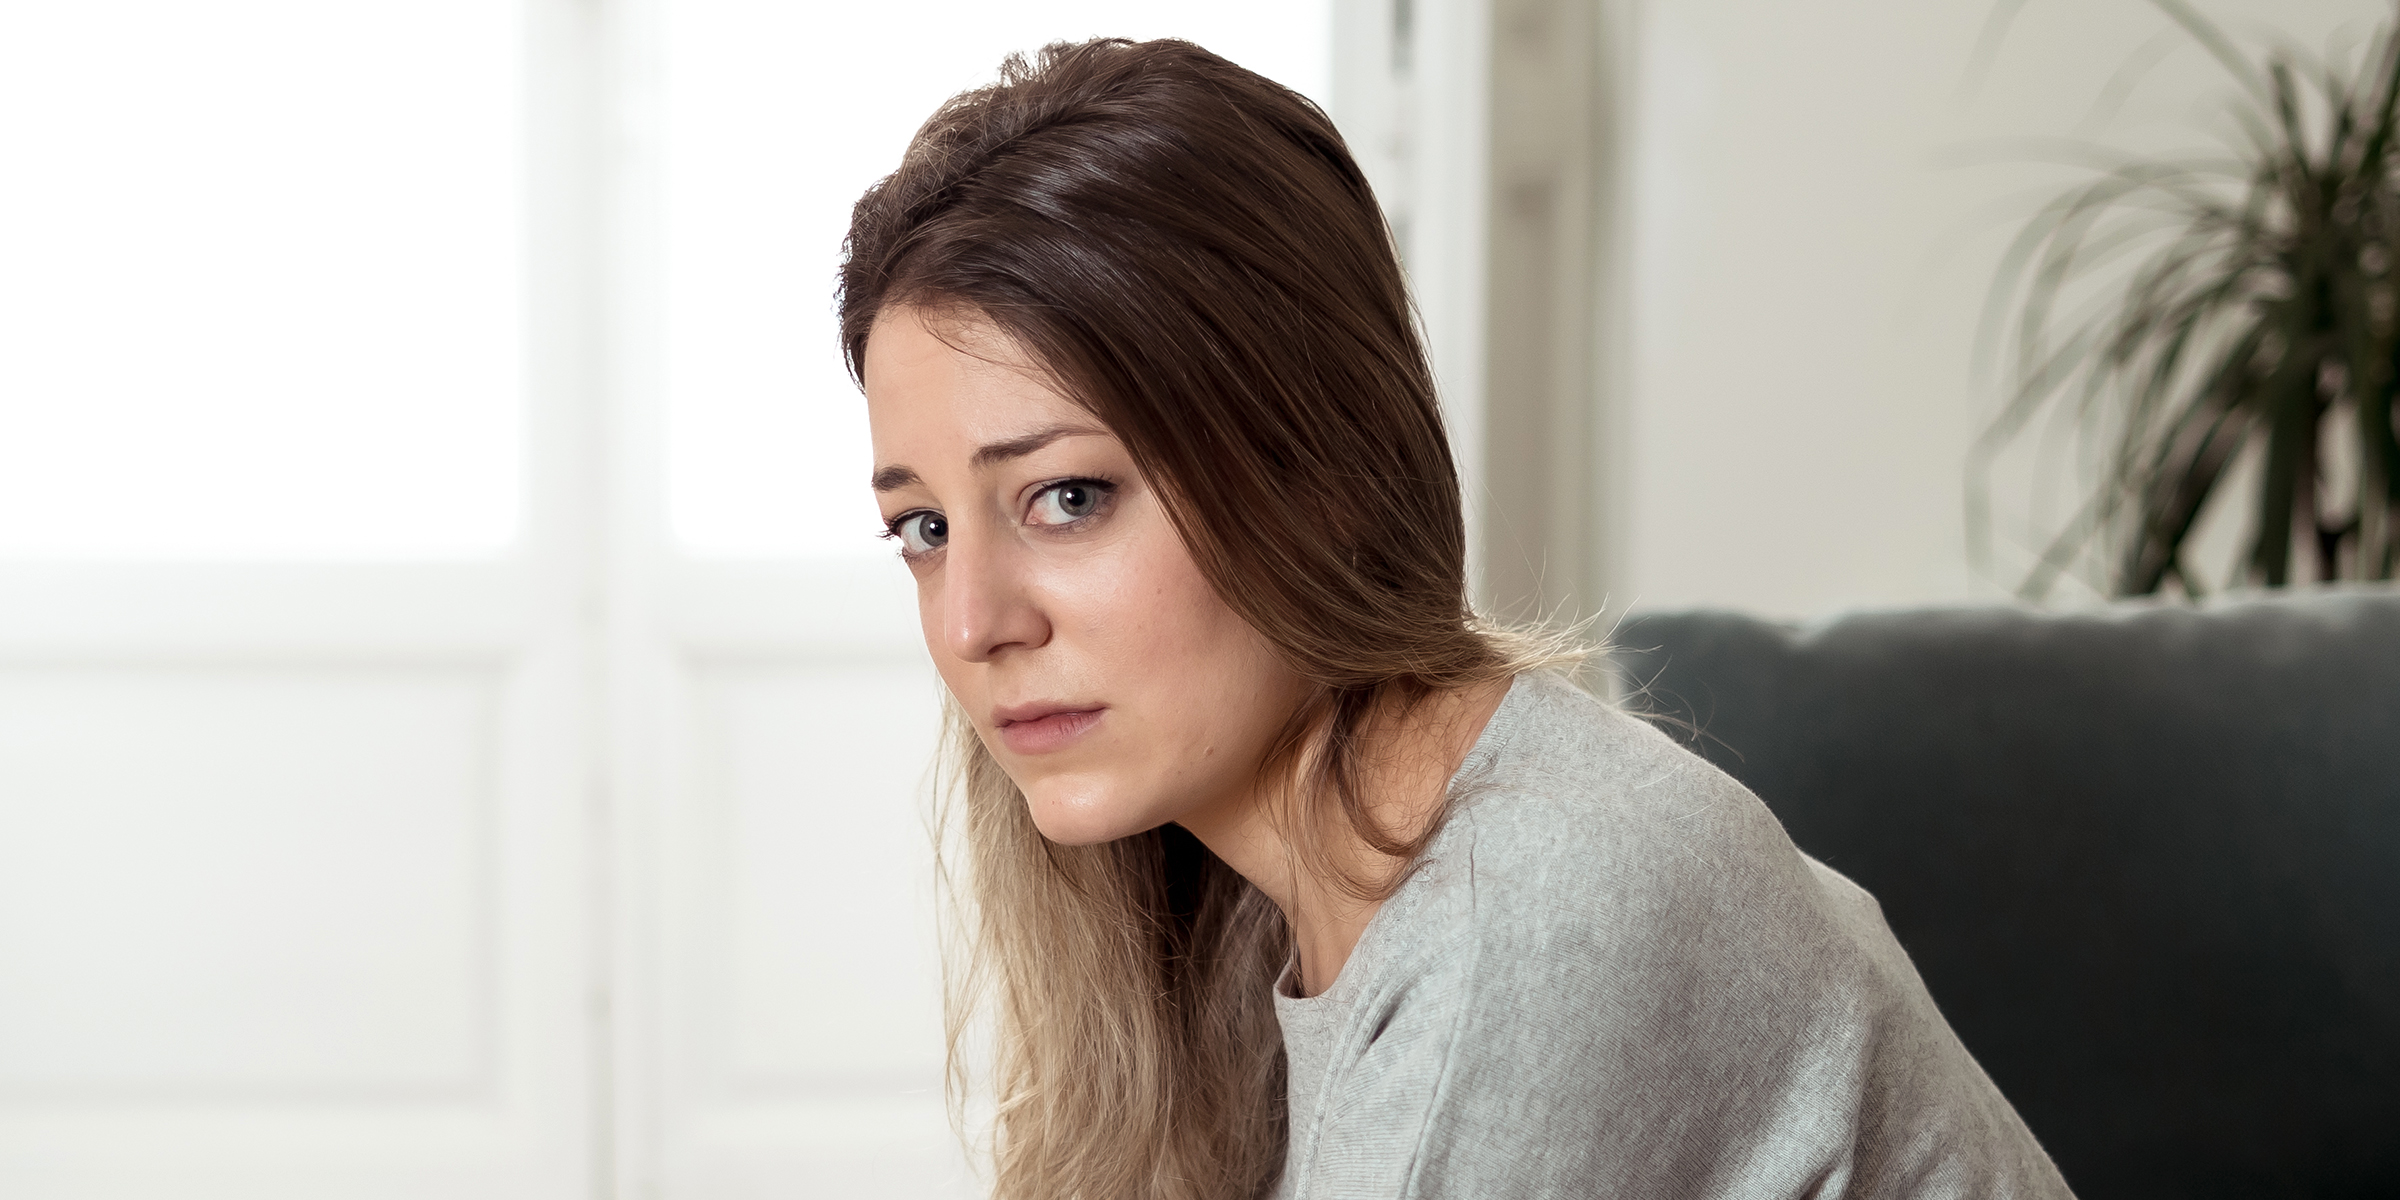 A sad-looking woman sitting home alone | Source: Shutterstock